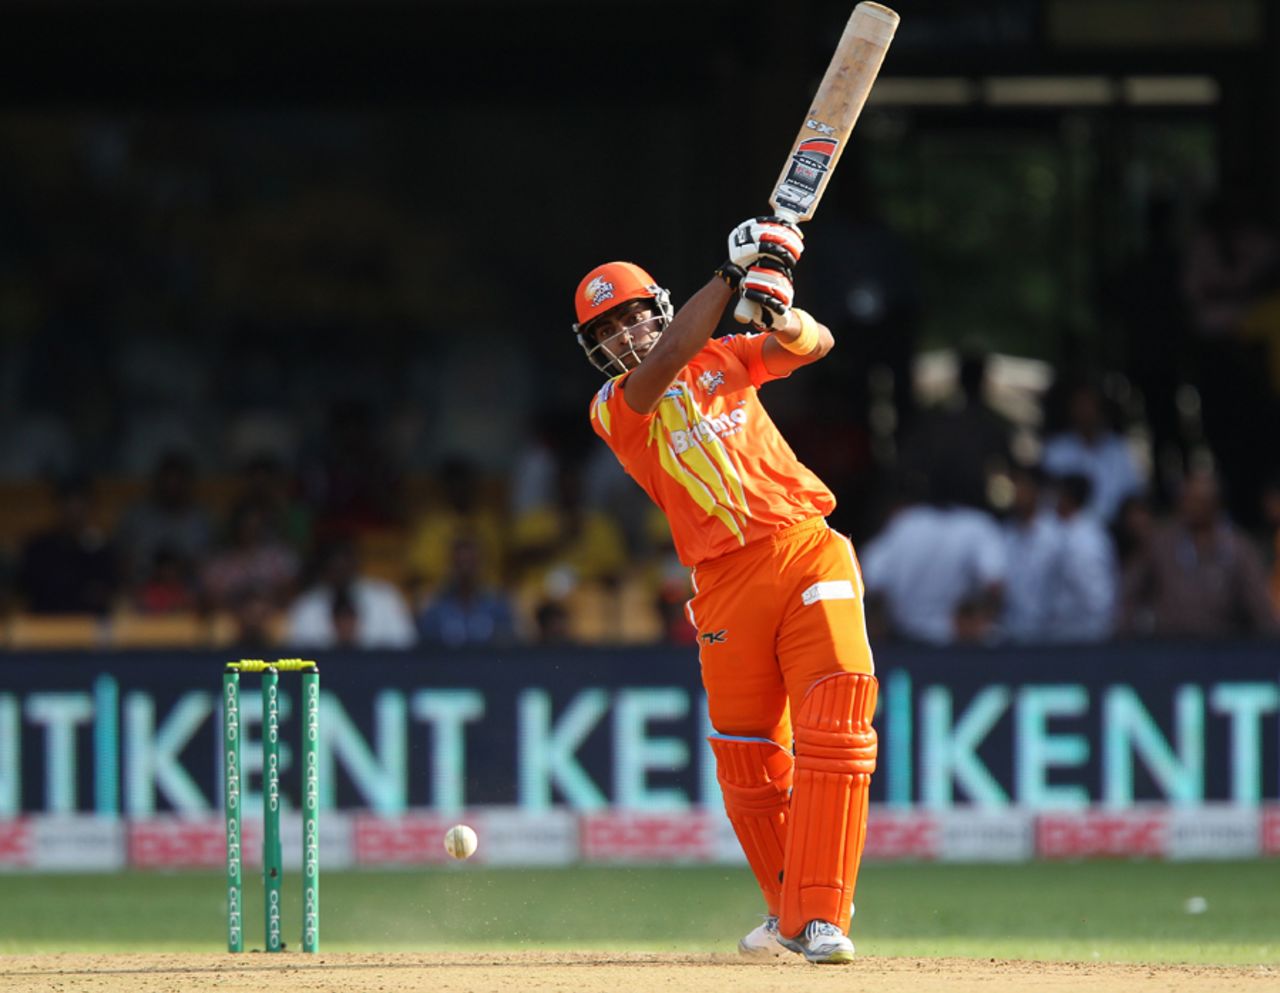 Umar Akmal hits out on his way to a fifty, Dolphins v Lahore Lions, Champions League T20, Bangalore, September 27, 2014